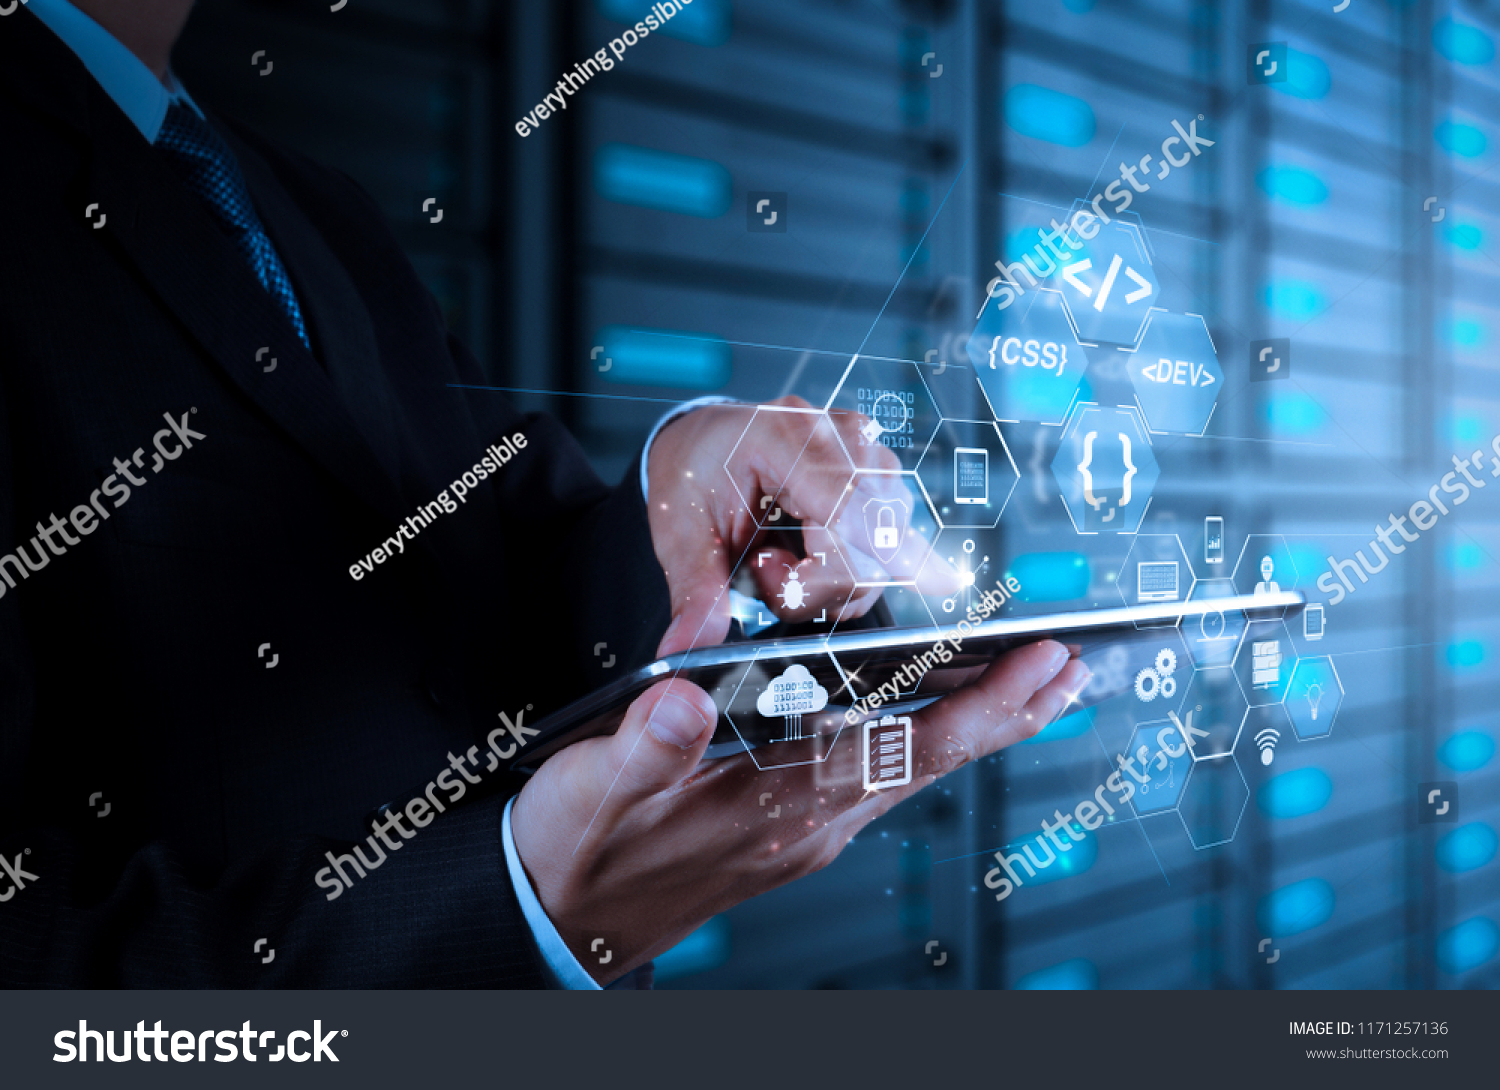 Coding software developer work with augmented reality dashboard computer icons of scrum agile development and code fork and versioning with responsive cybersecurity.businessman hand using tablet #1171257136